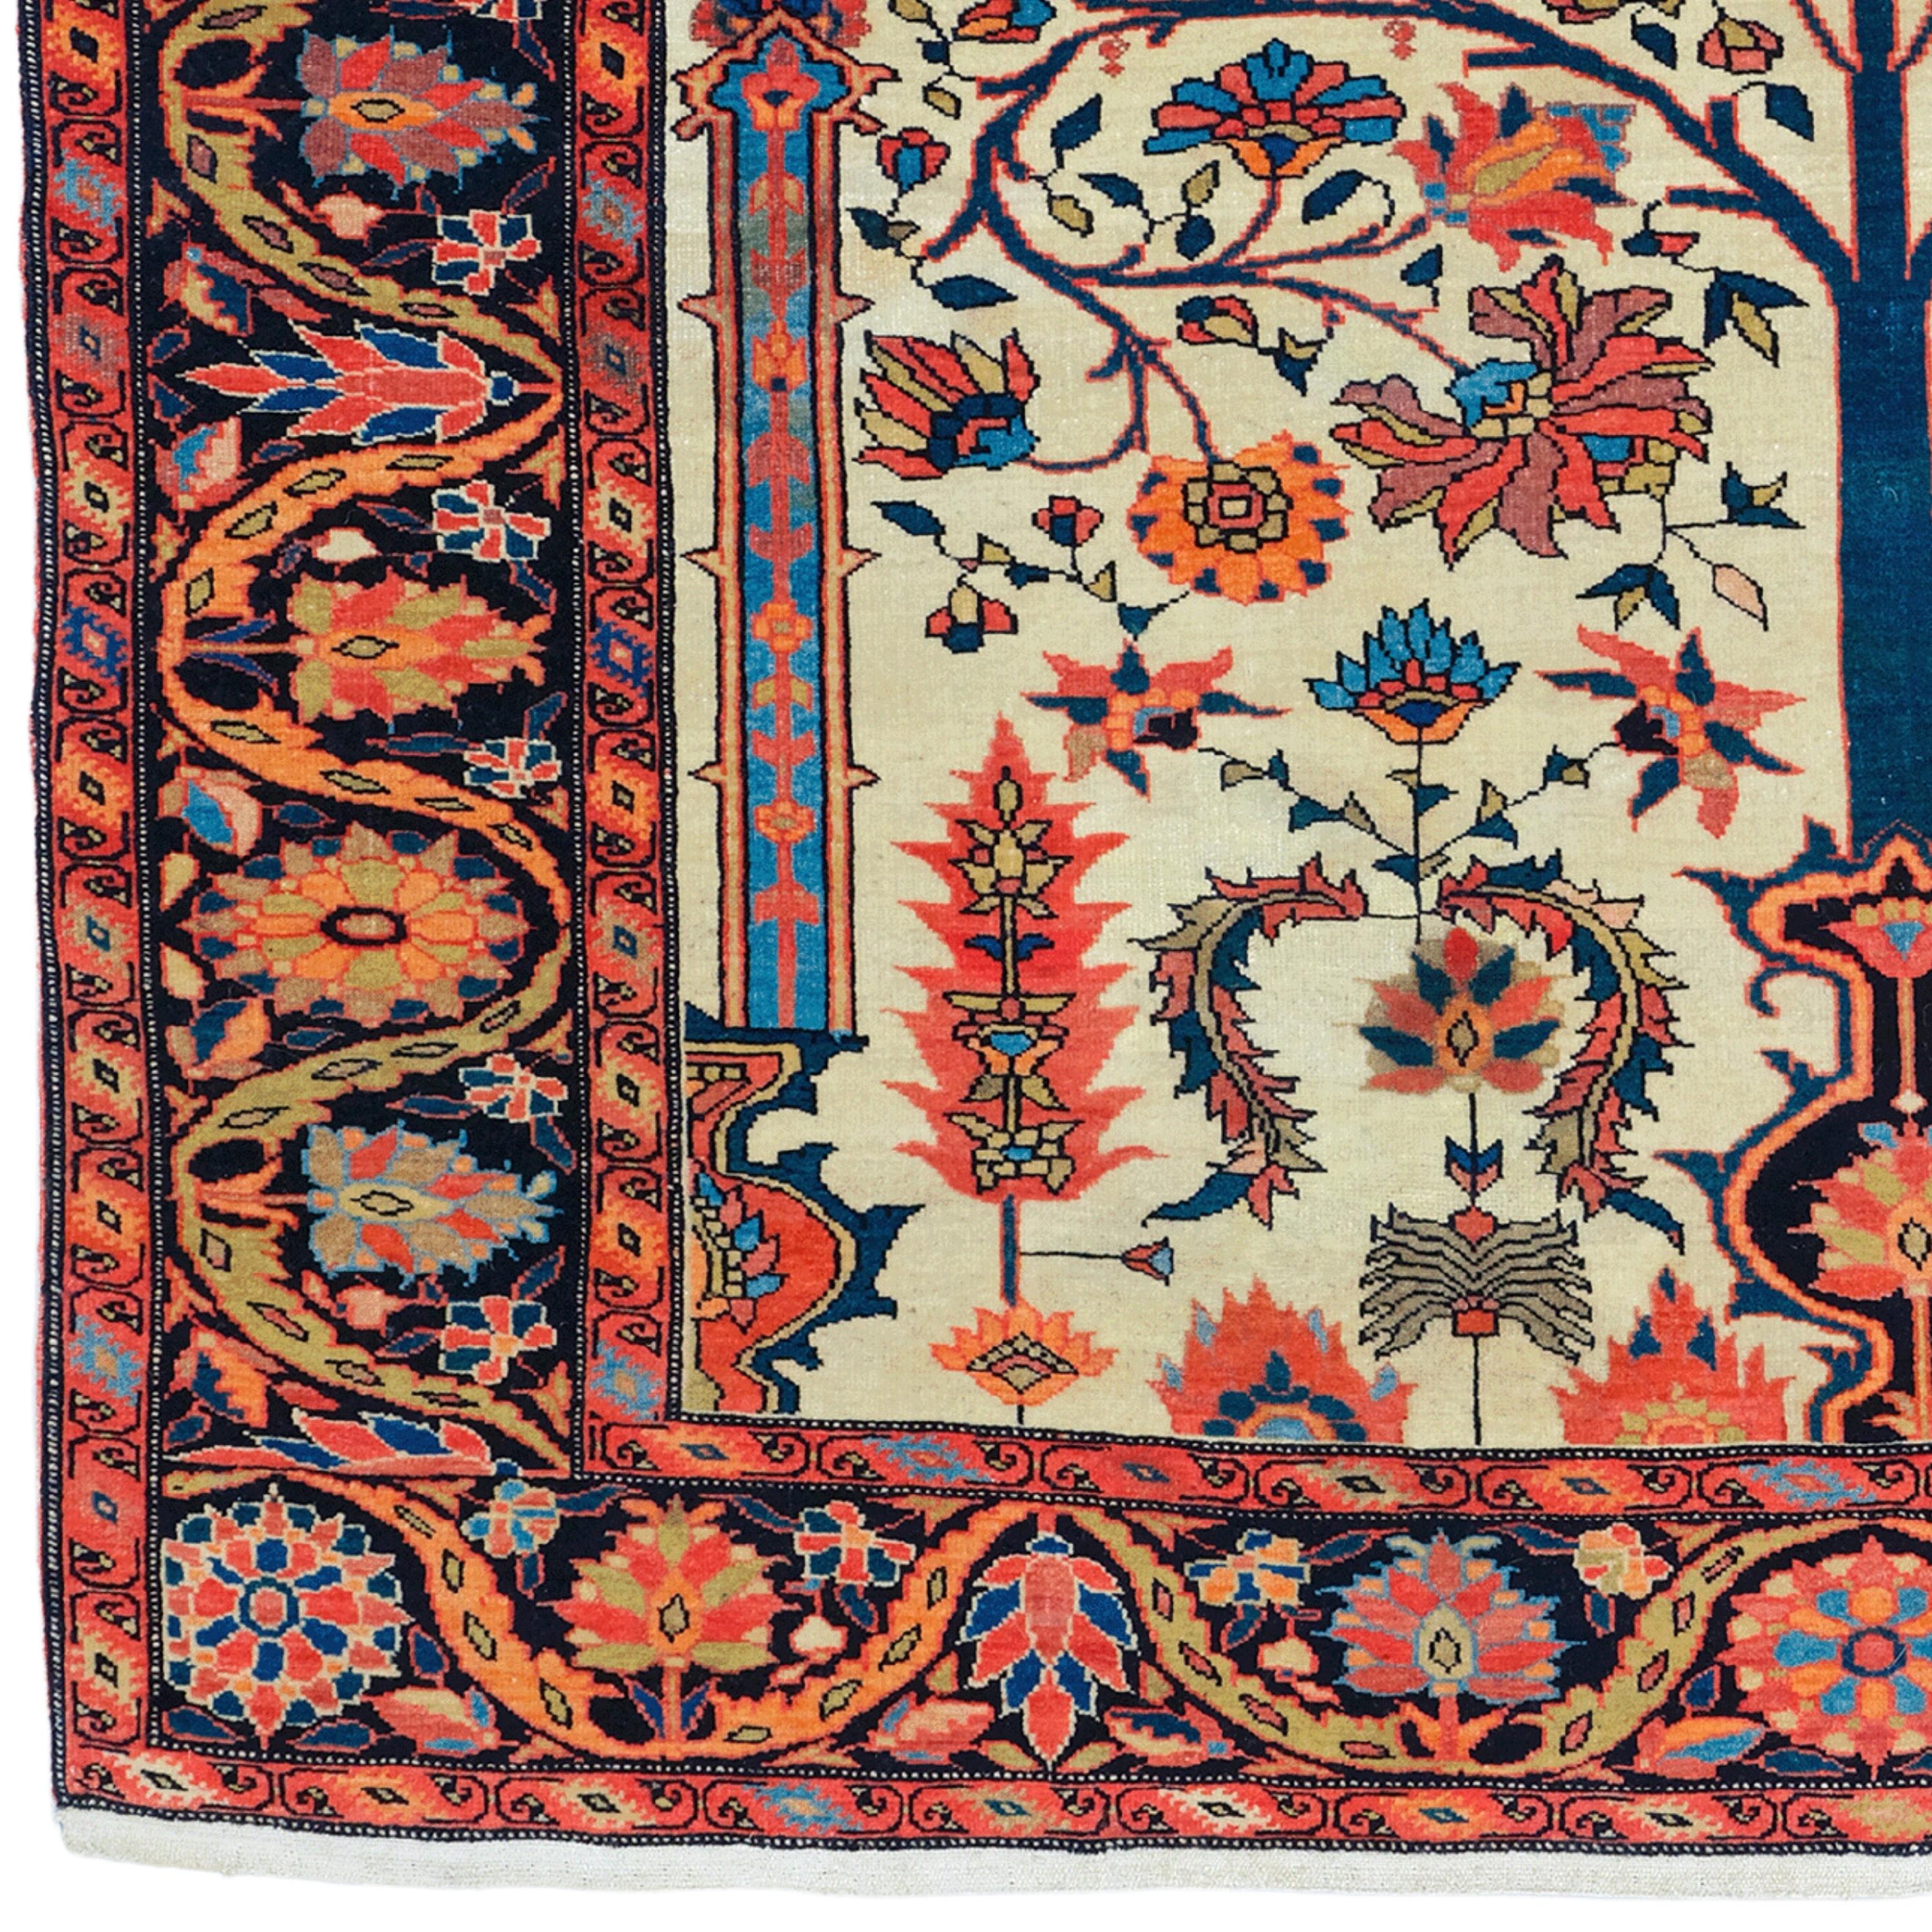 Late 19th Century Persian Sarouk Rug

Pile-woven in a format untypical of export pieces, indicating a Persian client, this white-ground Farahan belongs to the garden type. A longing for flowering gardens, viewed as images of paradise on earth, is